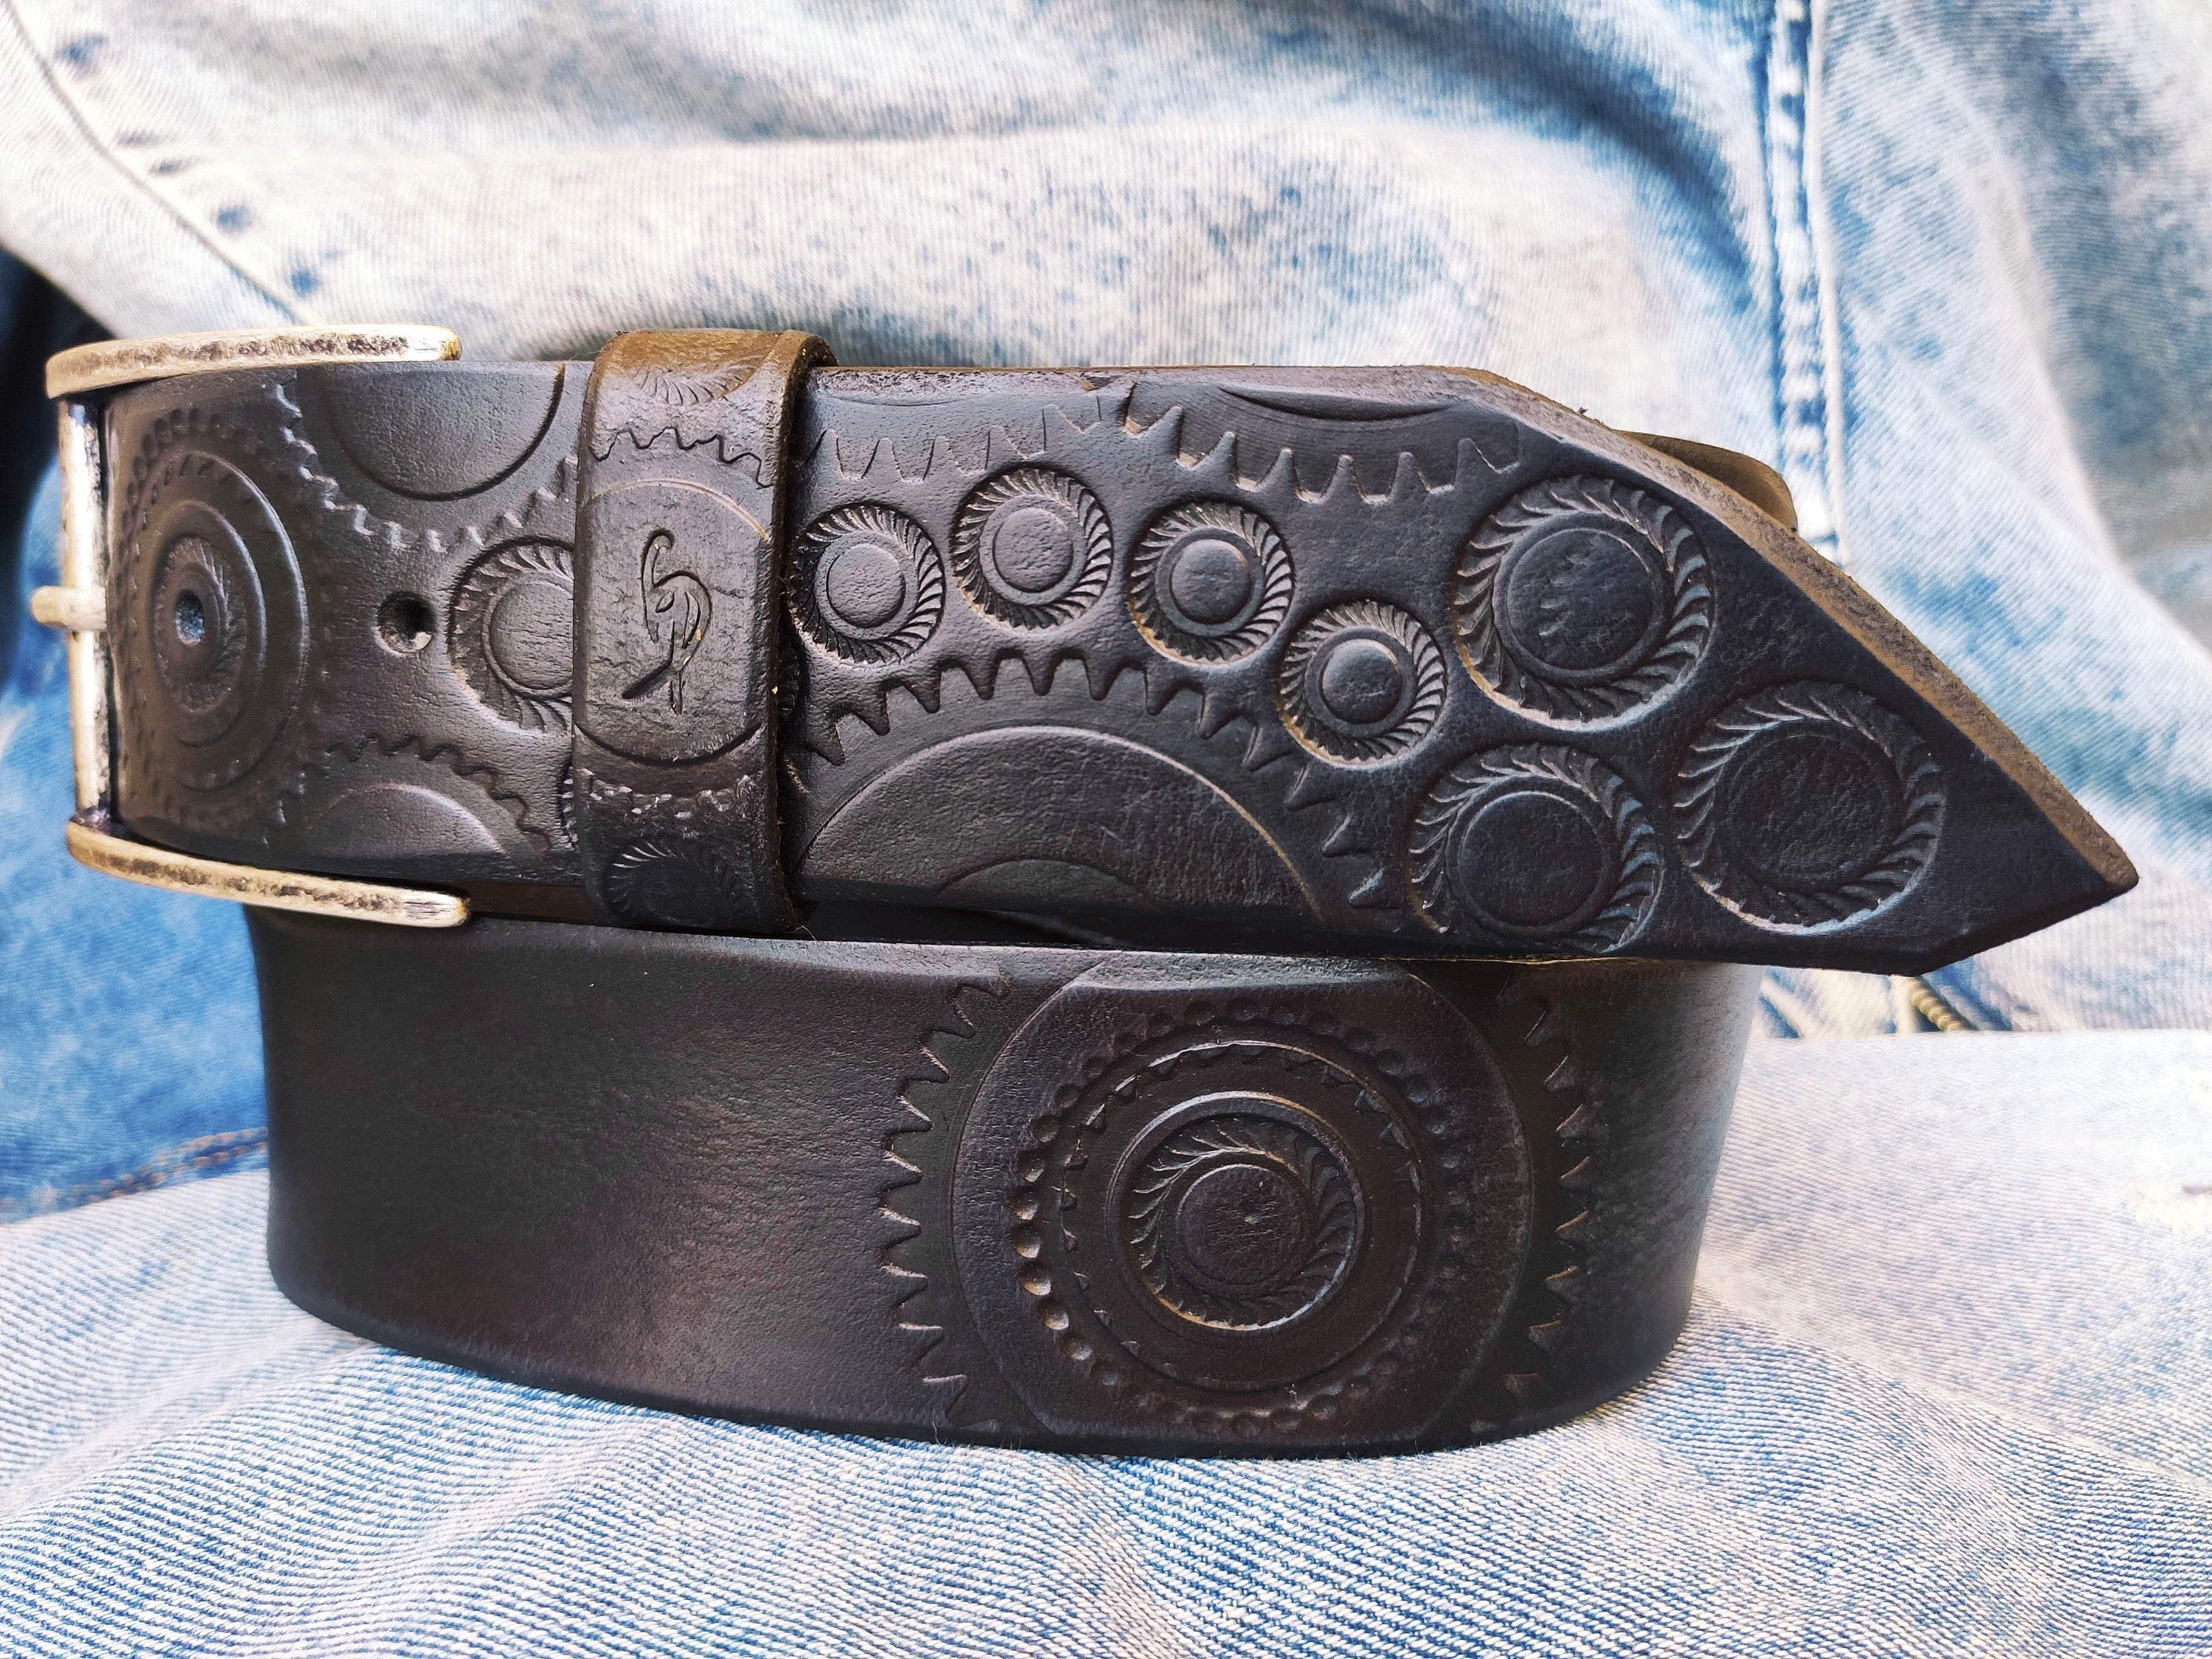 The Christian Hosoi Signature Leather Belt by Nash Motorcycle Co. SM / Black / Old Brass Hardware